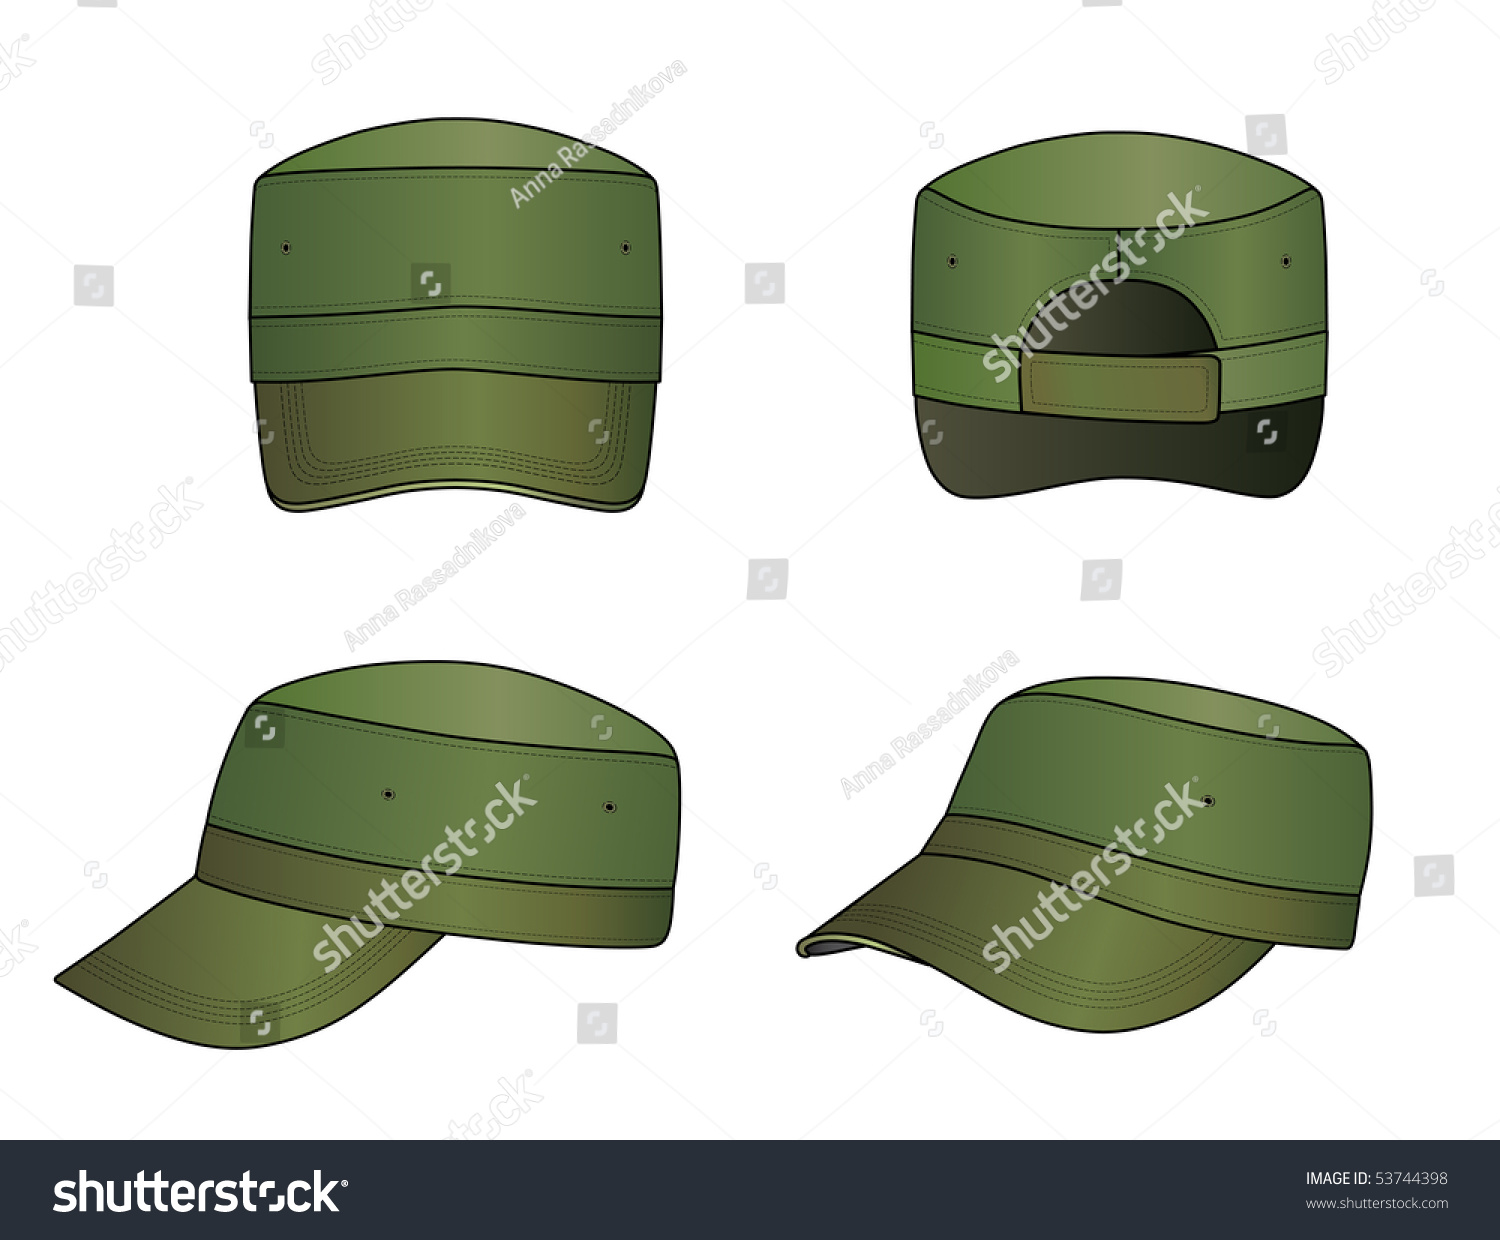 Green Military Cap Vector Illustration Isolated On White - 53744398 ...